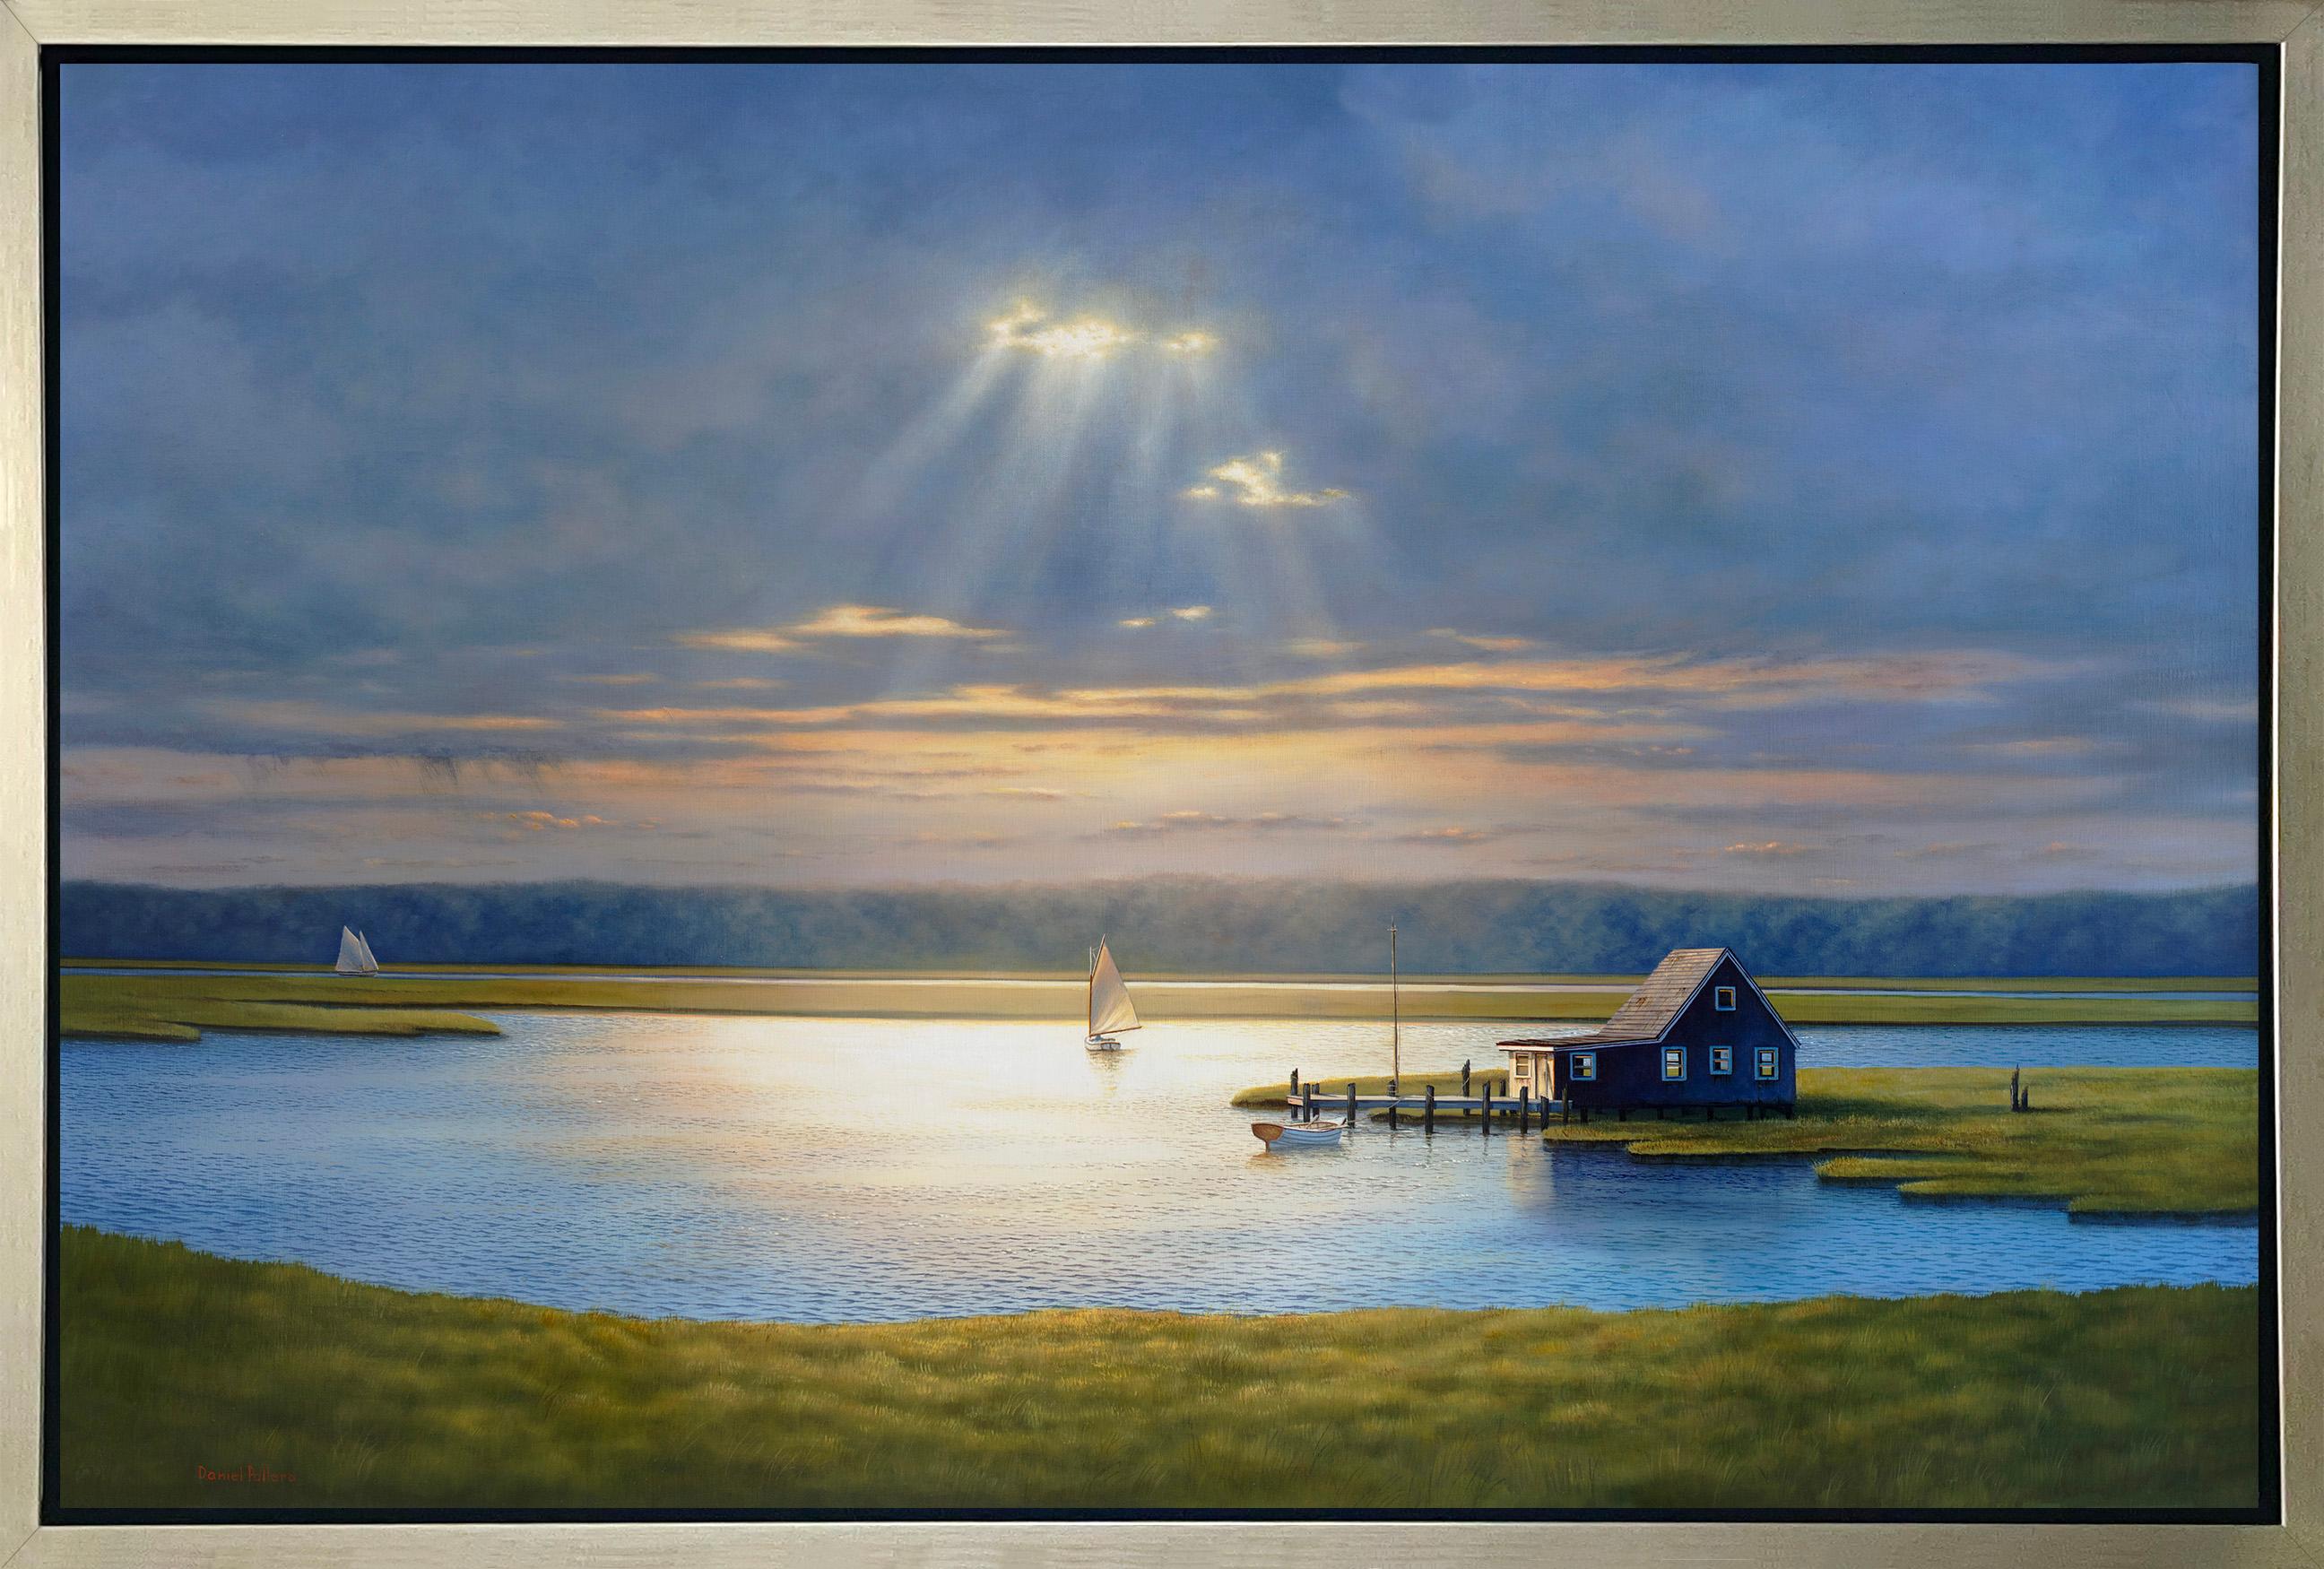 Daniel Pollera Landscape Print - "Into the Light, " Framed Limited Edition Giclee Print, 30" x 45"